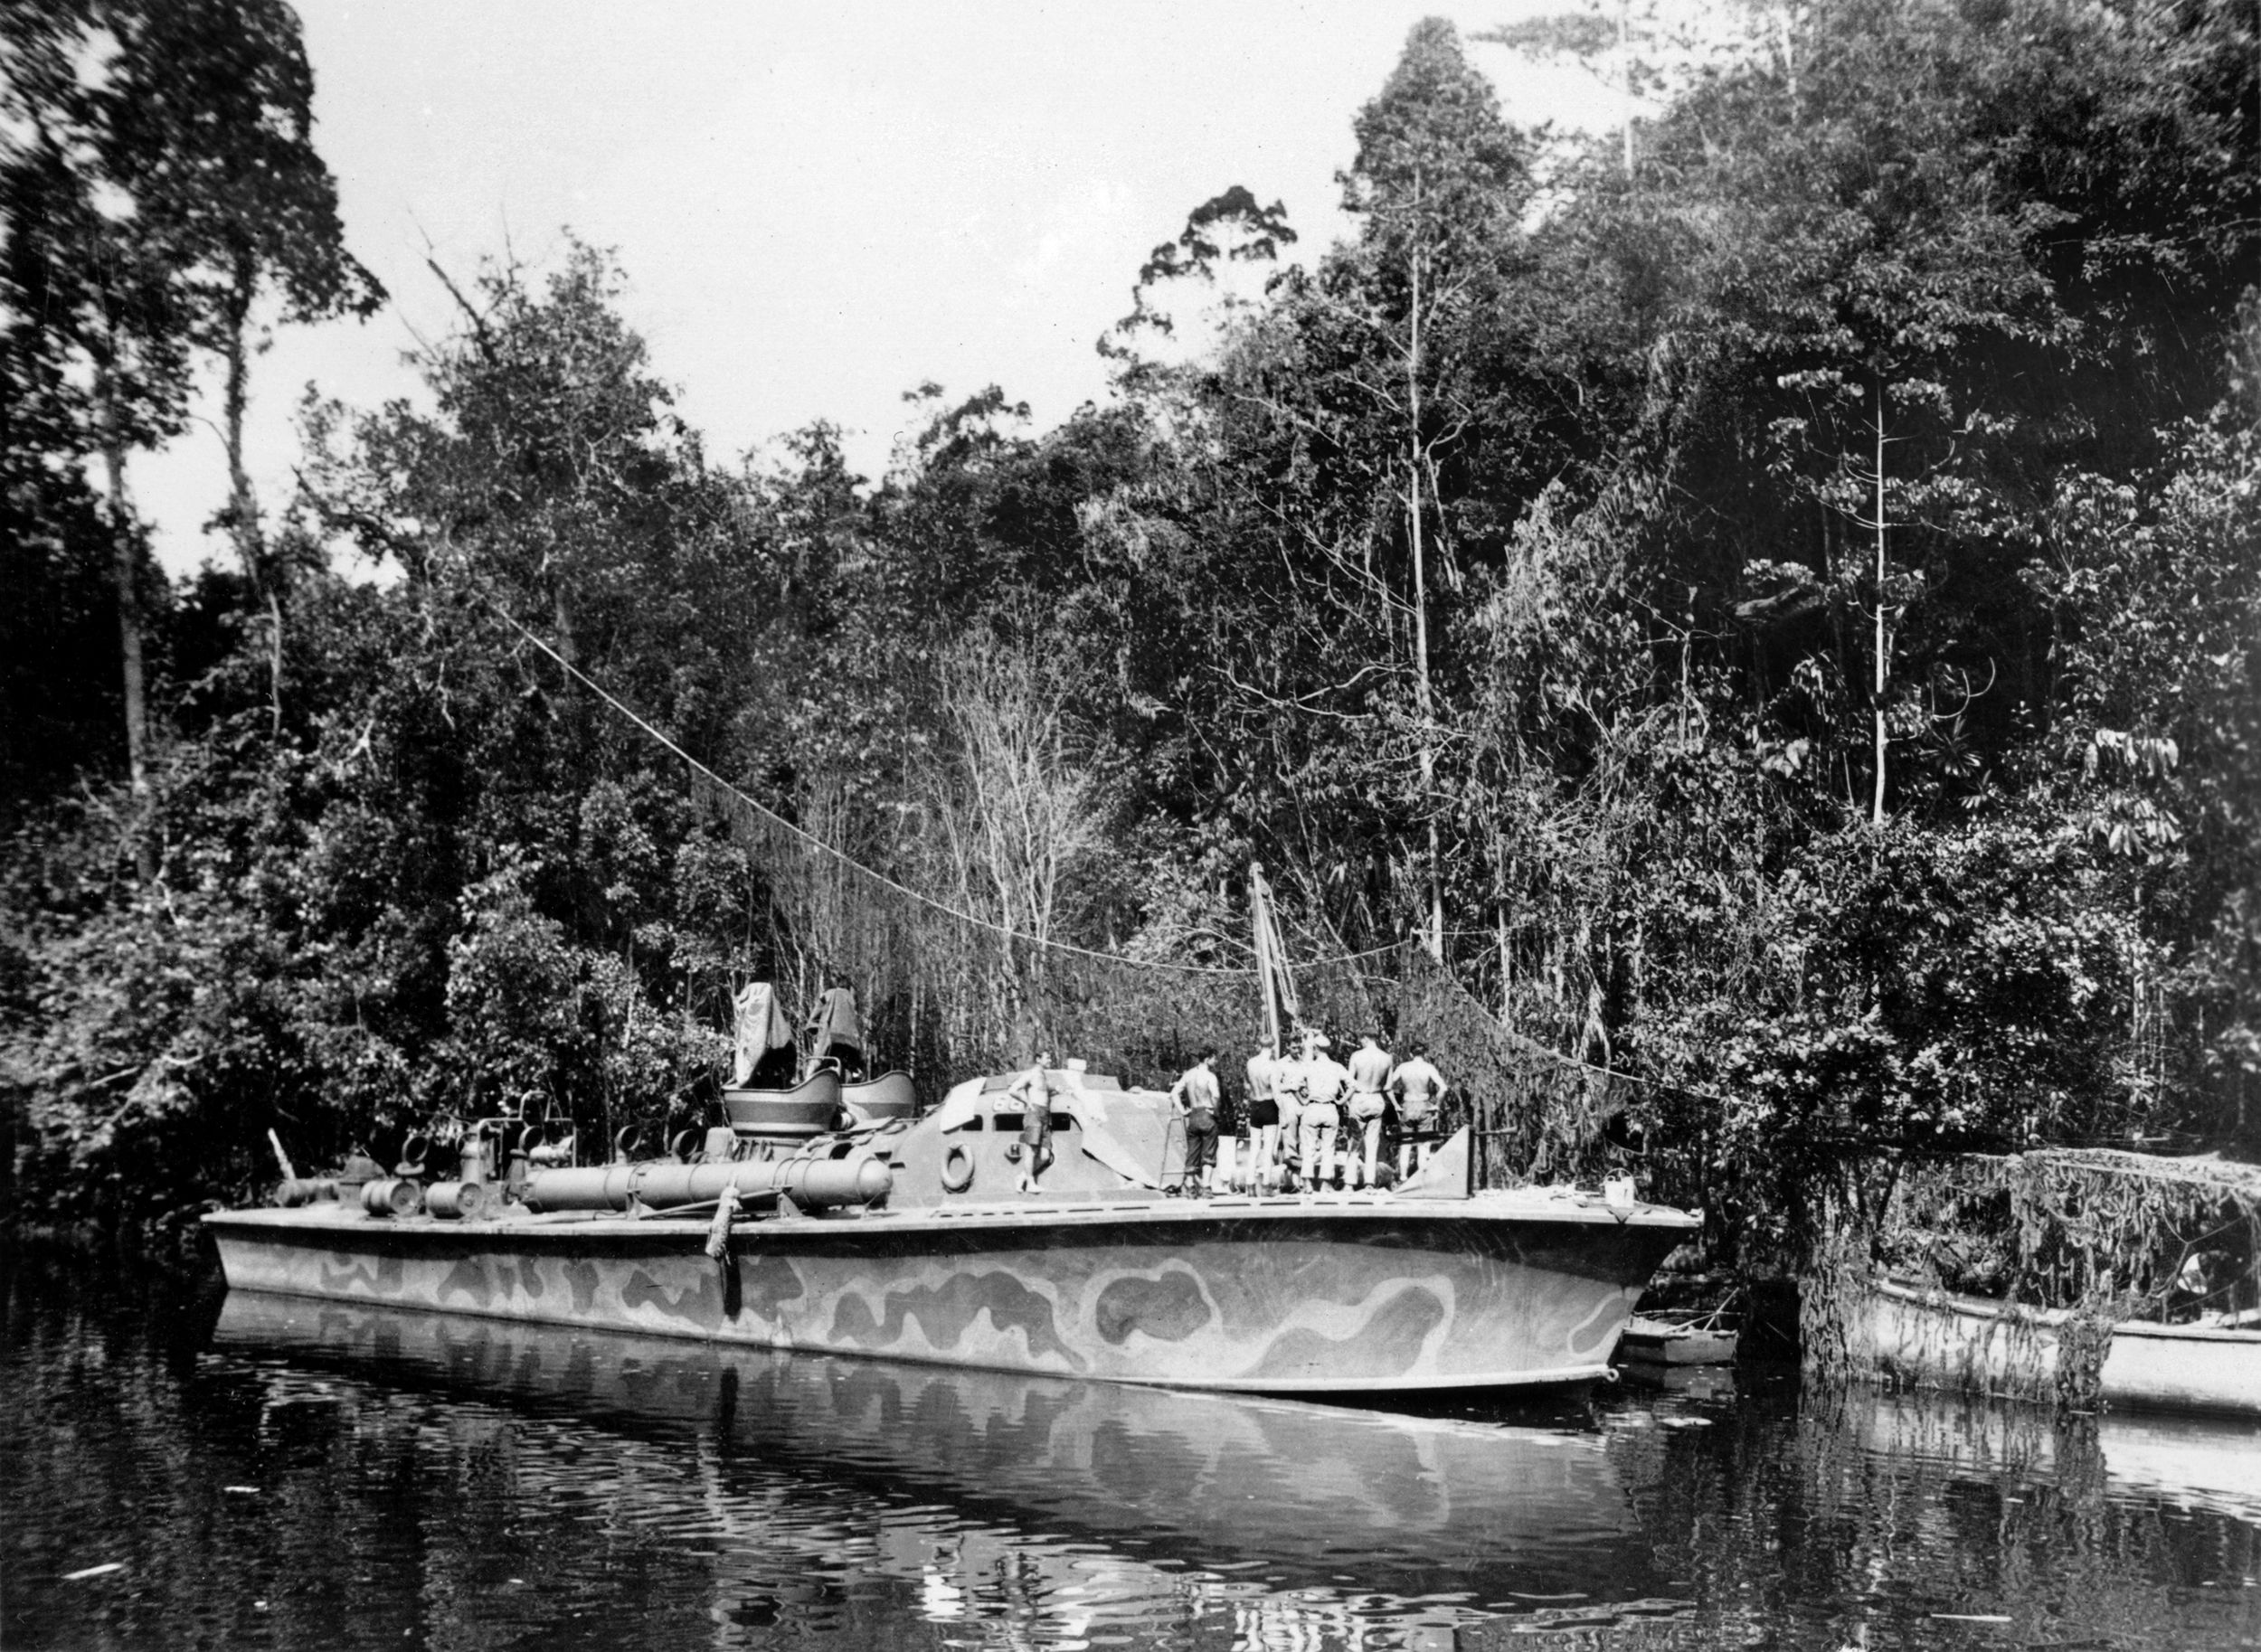 One of the “Green Dragon” boats docked in New Guinea prepares for a combat run. A number of PT boats were brought out of mothballs after the war to take part in Hollywood productions